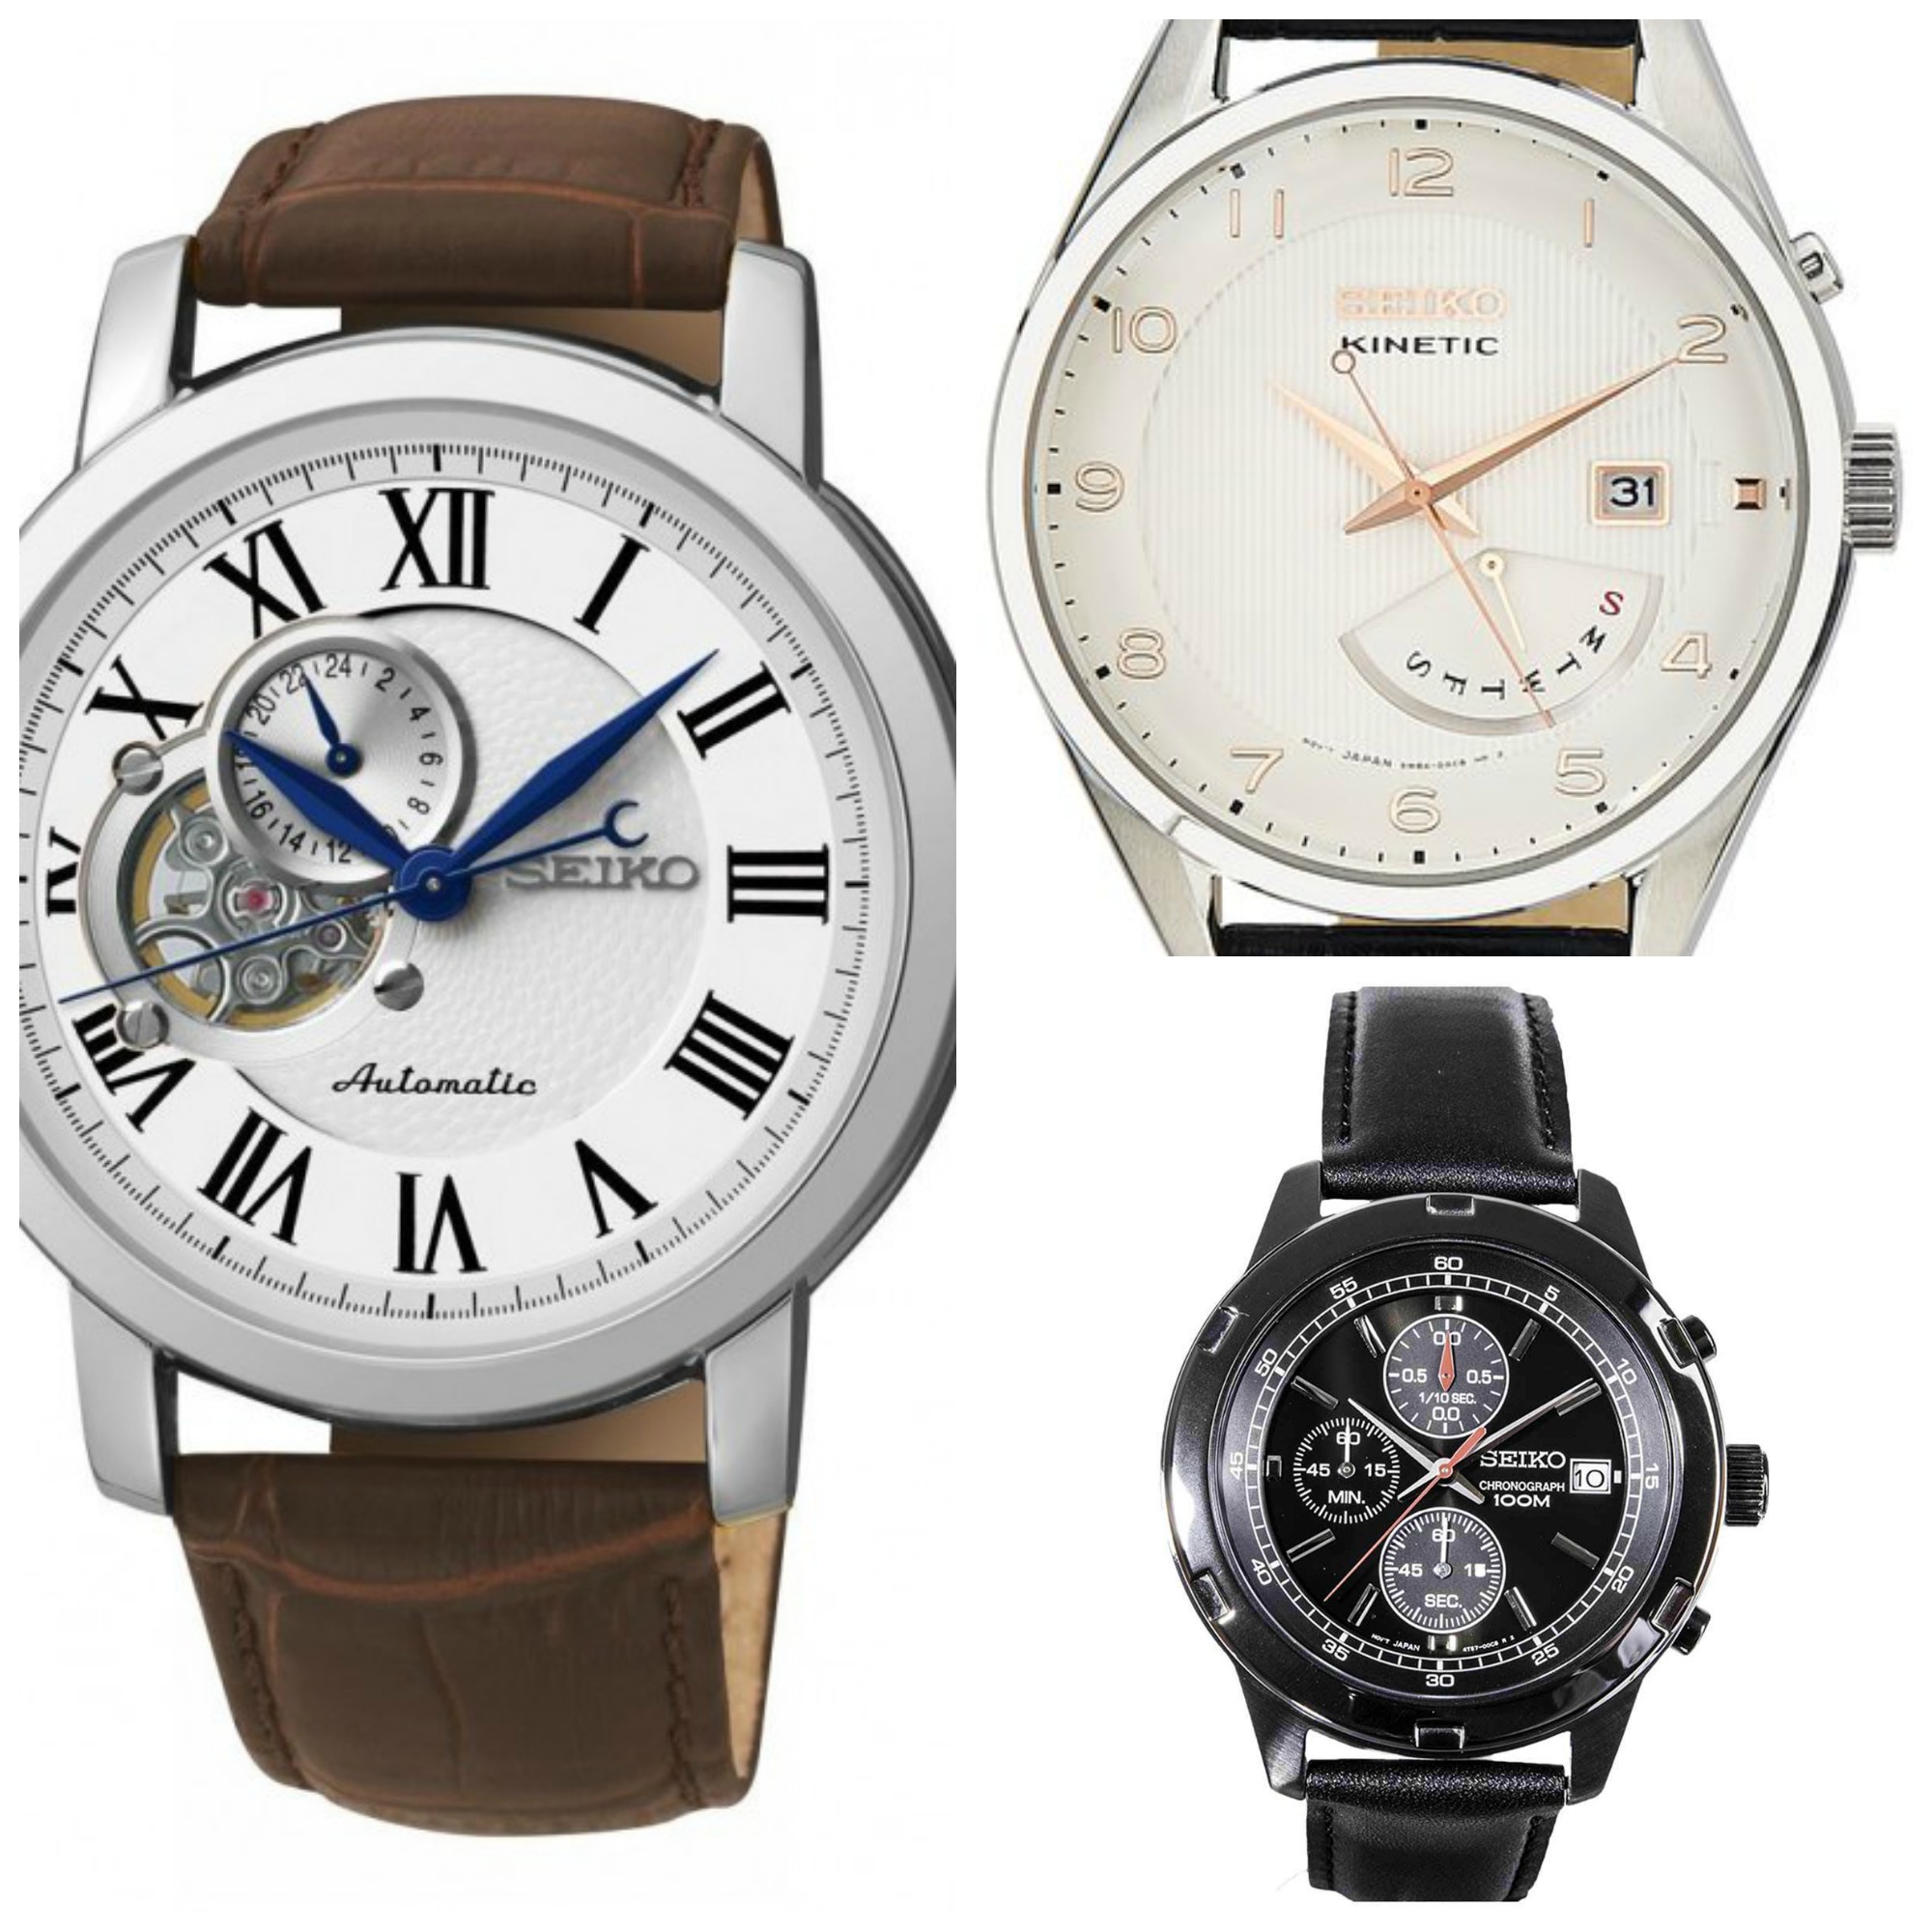 Best 10 Seiko Watches With Leather Straps For Men - The Watch Blog